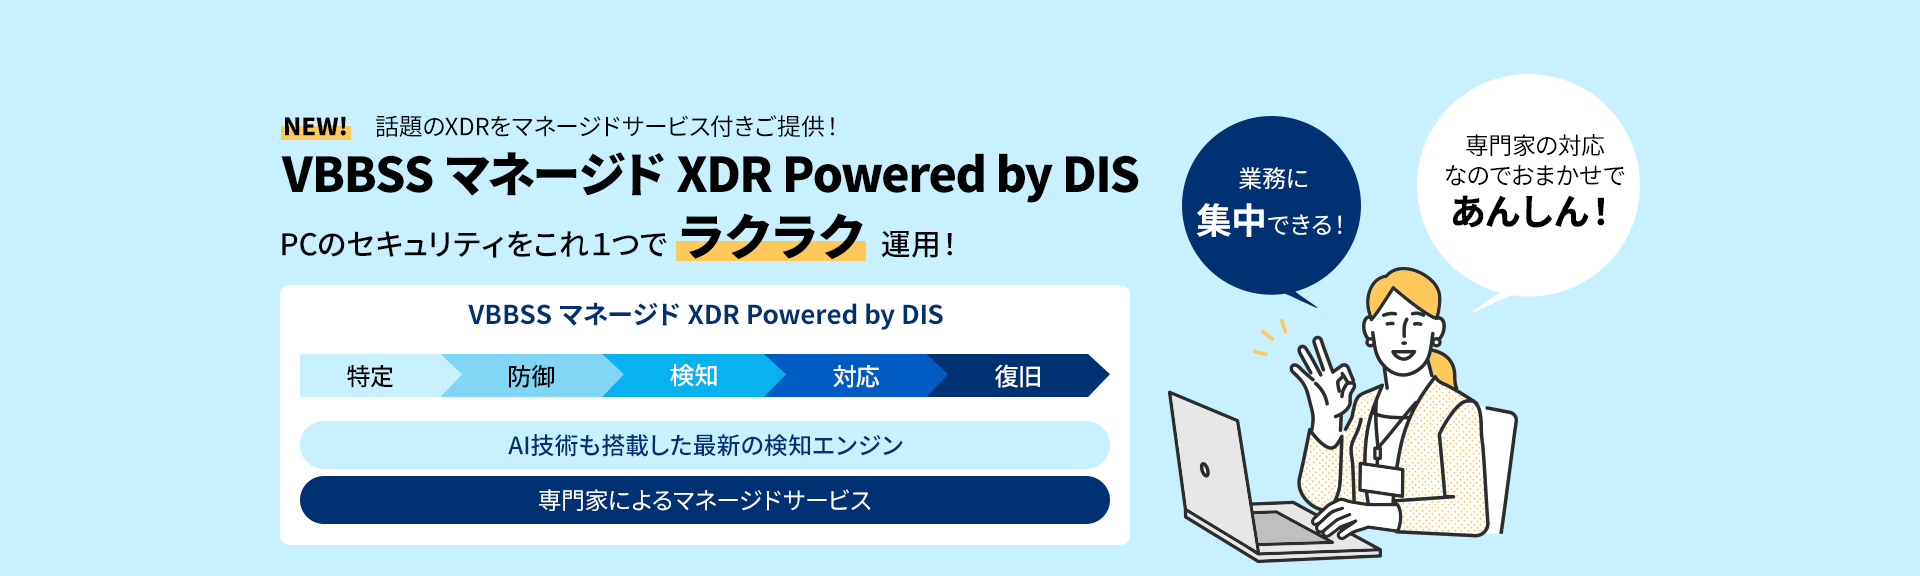 VBBSS マネージド XDR Powered by DIS